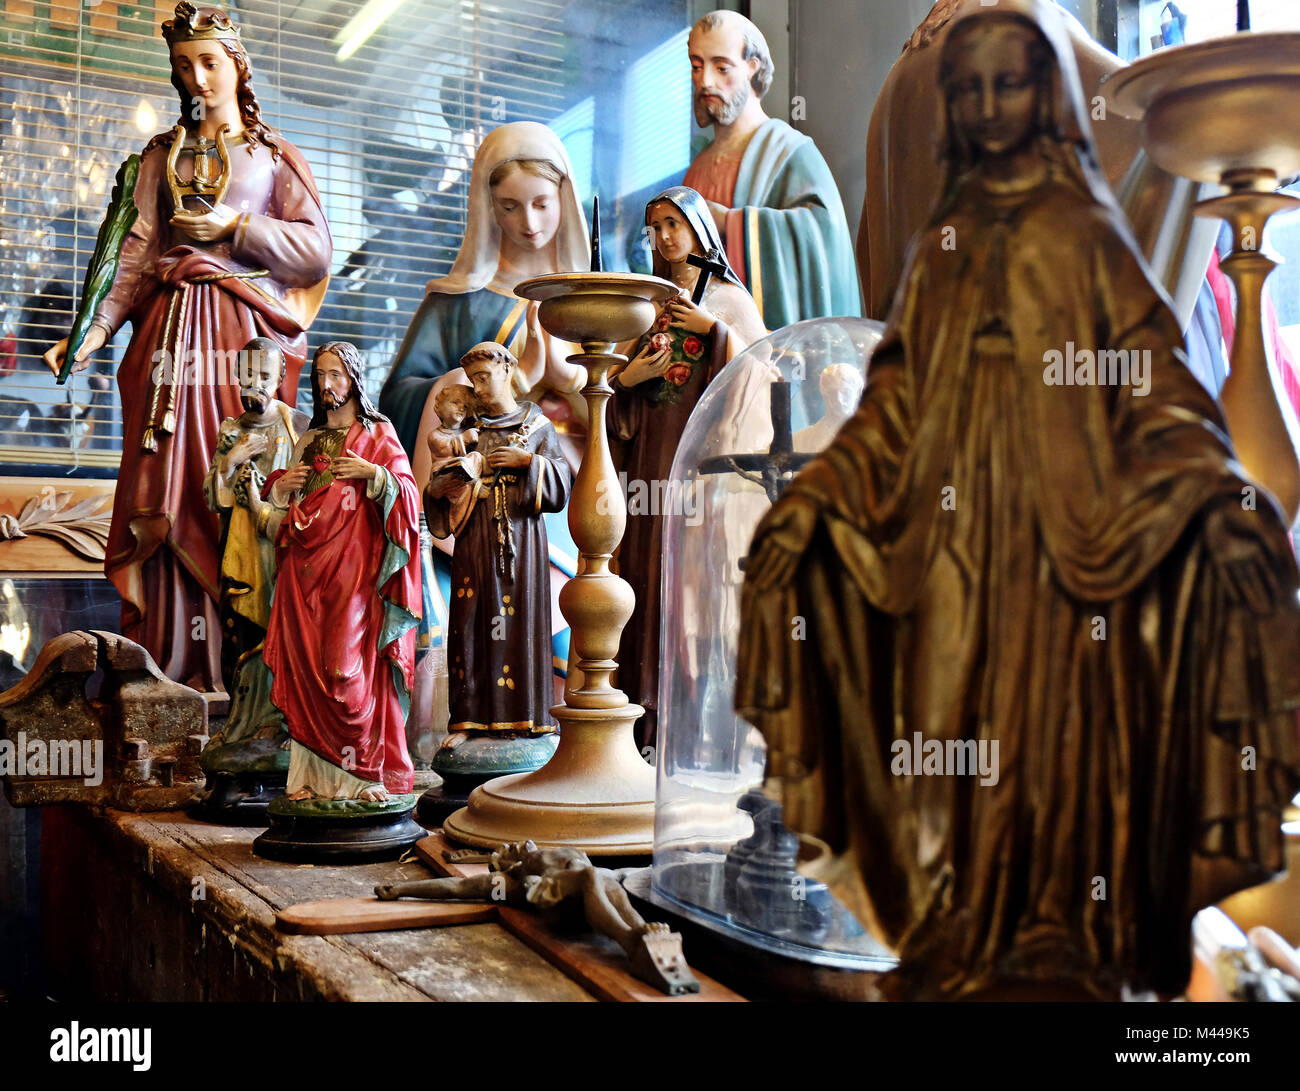 Religious figures displayed on table Stock Photo